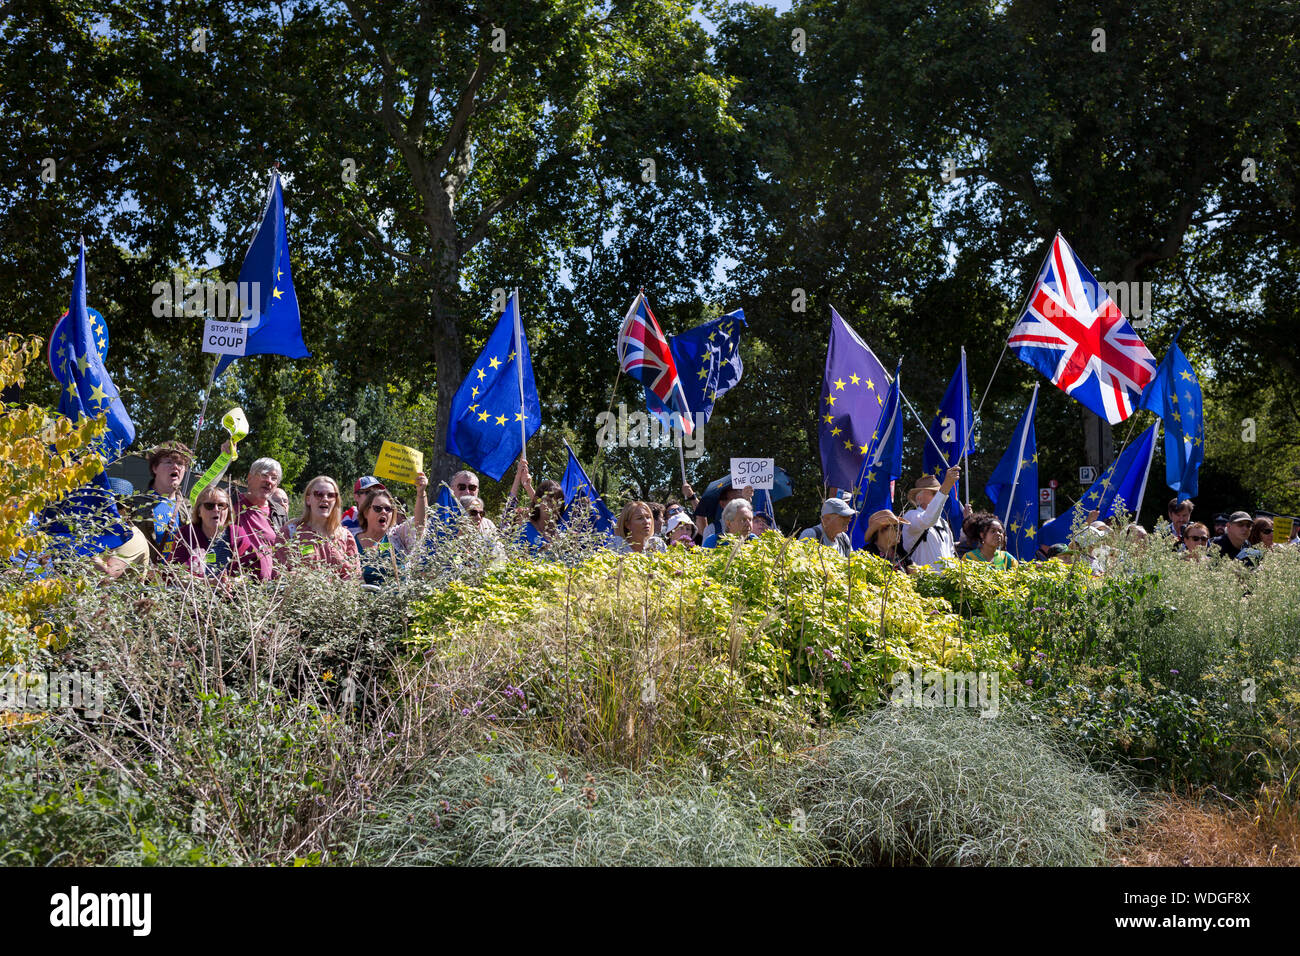 A day after British Prime Minister Boris Johnson successfully asked the Queen to suspend (prorogue) Parliament in order to manoeuvre his Brexit deal with the EU in Brussels, Remain protesters stand with flags and banners while lunchtime TV interviews are filmed by broadcasters on College Green, on 29th August 2019, in Westminster, London, England. Stock Photo